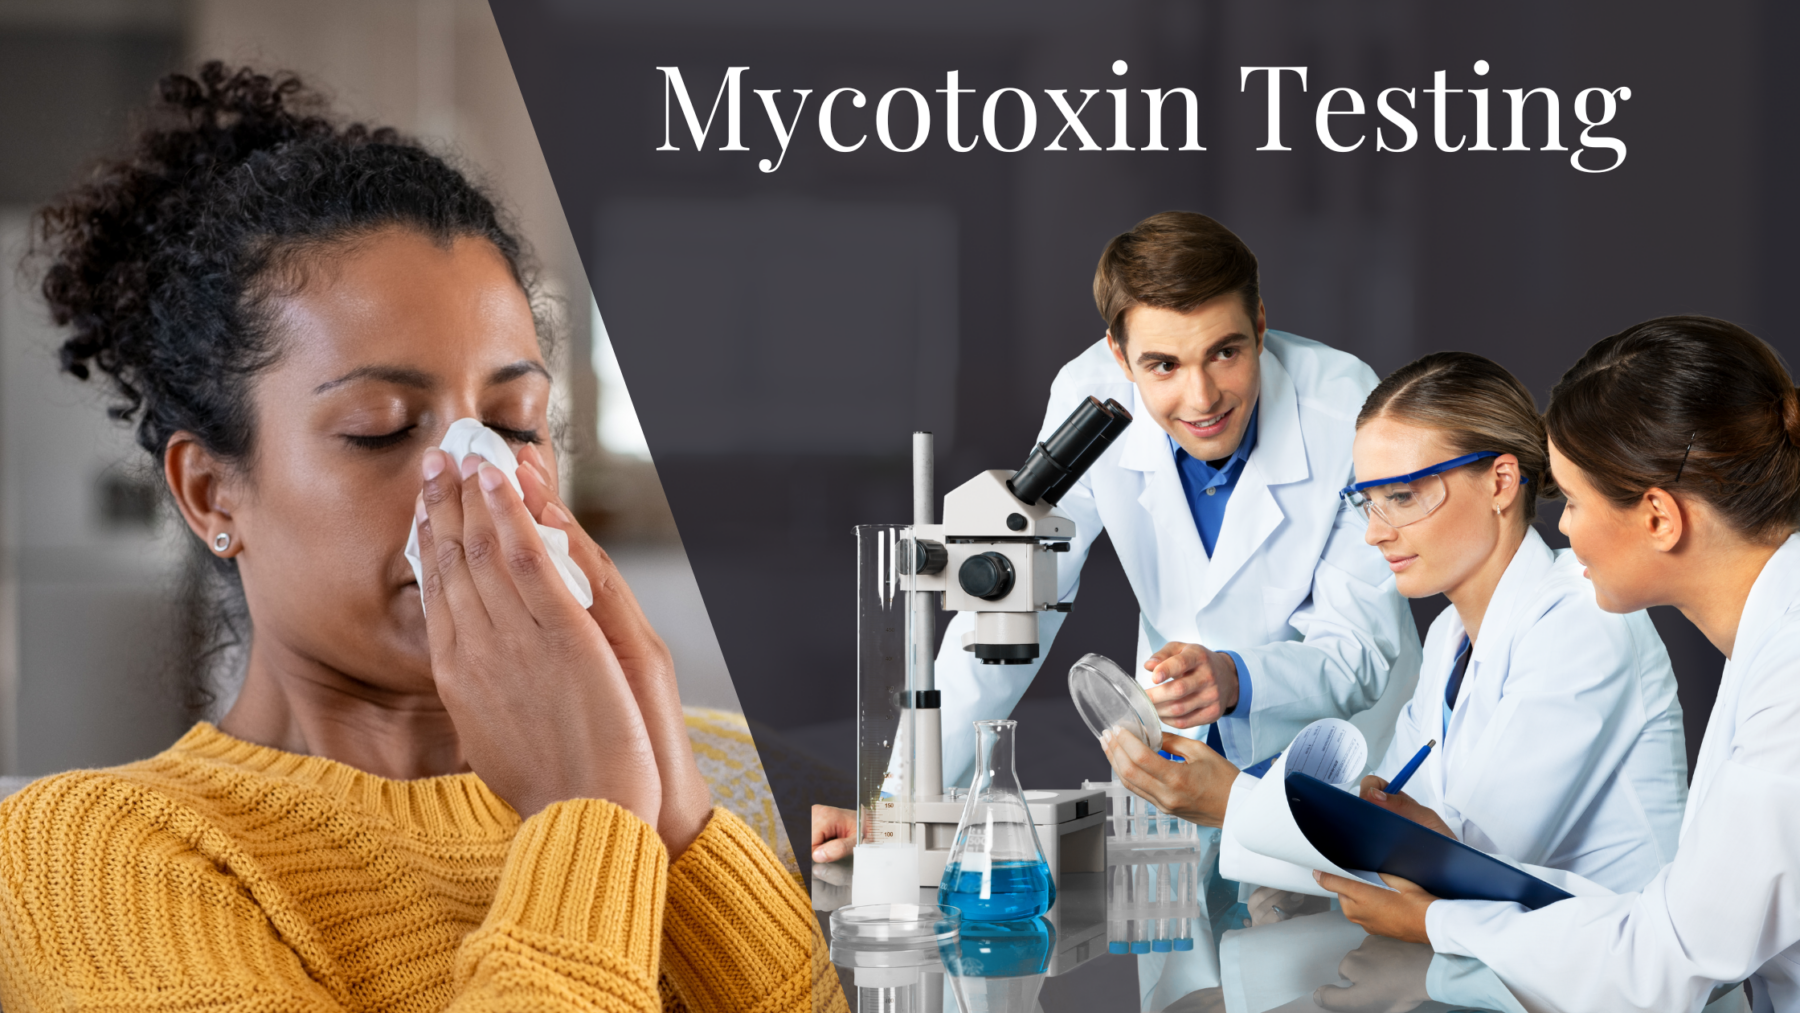 Mold Toxicity: Is Your Health at Stake? Discover the Truth with a Mycotoxin Testing!